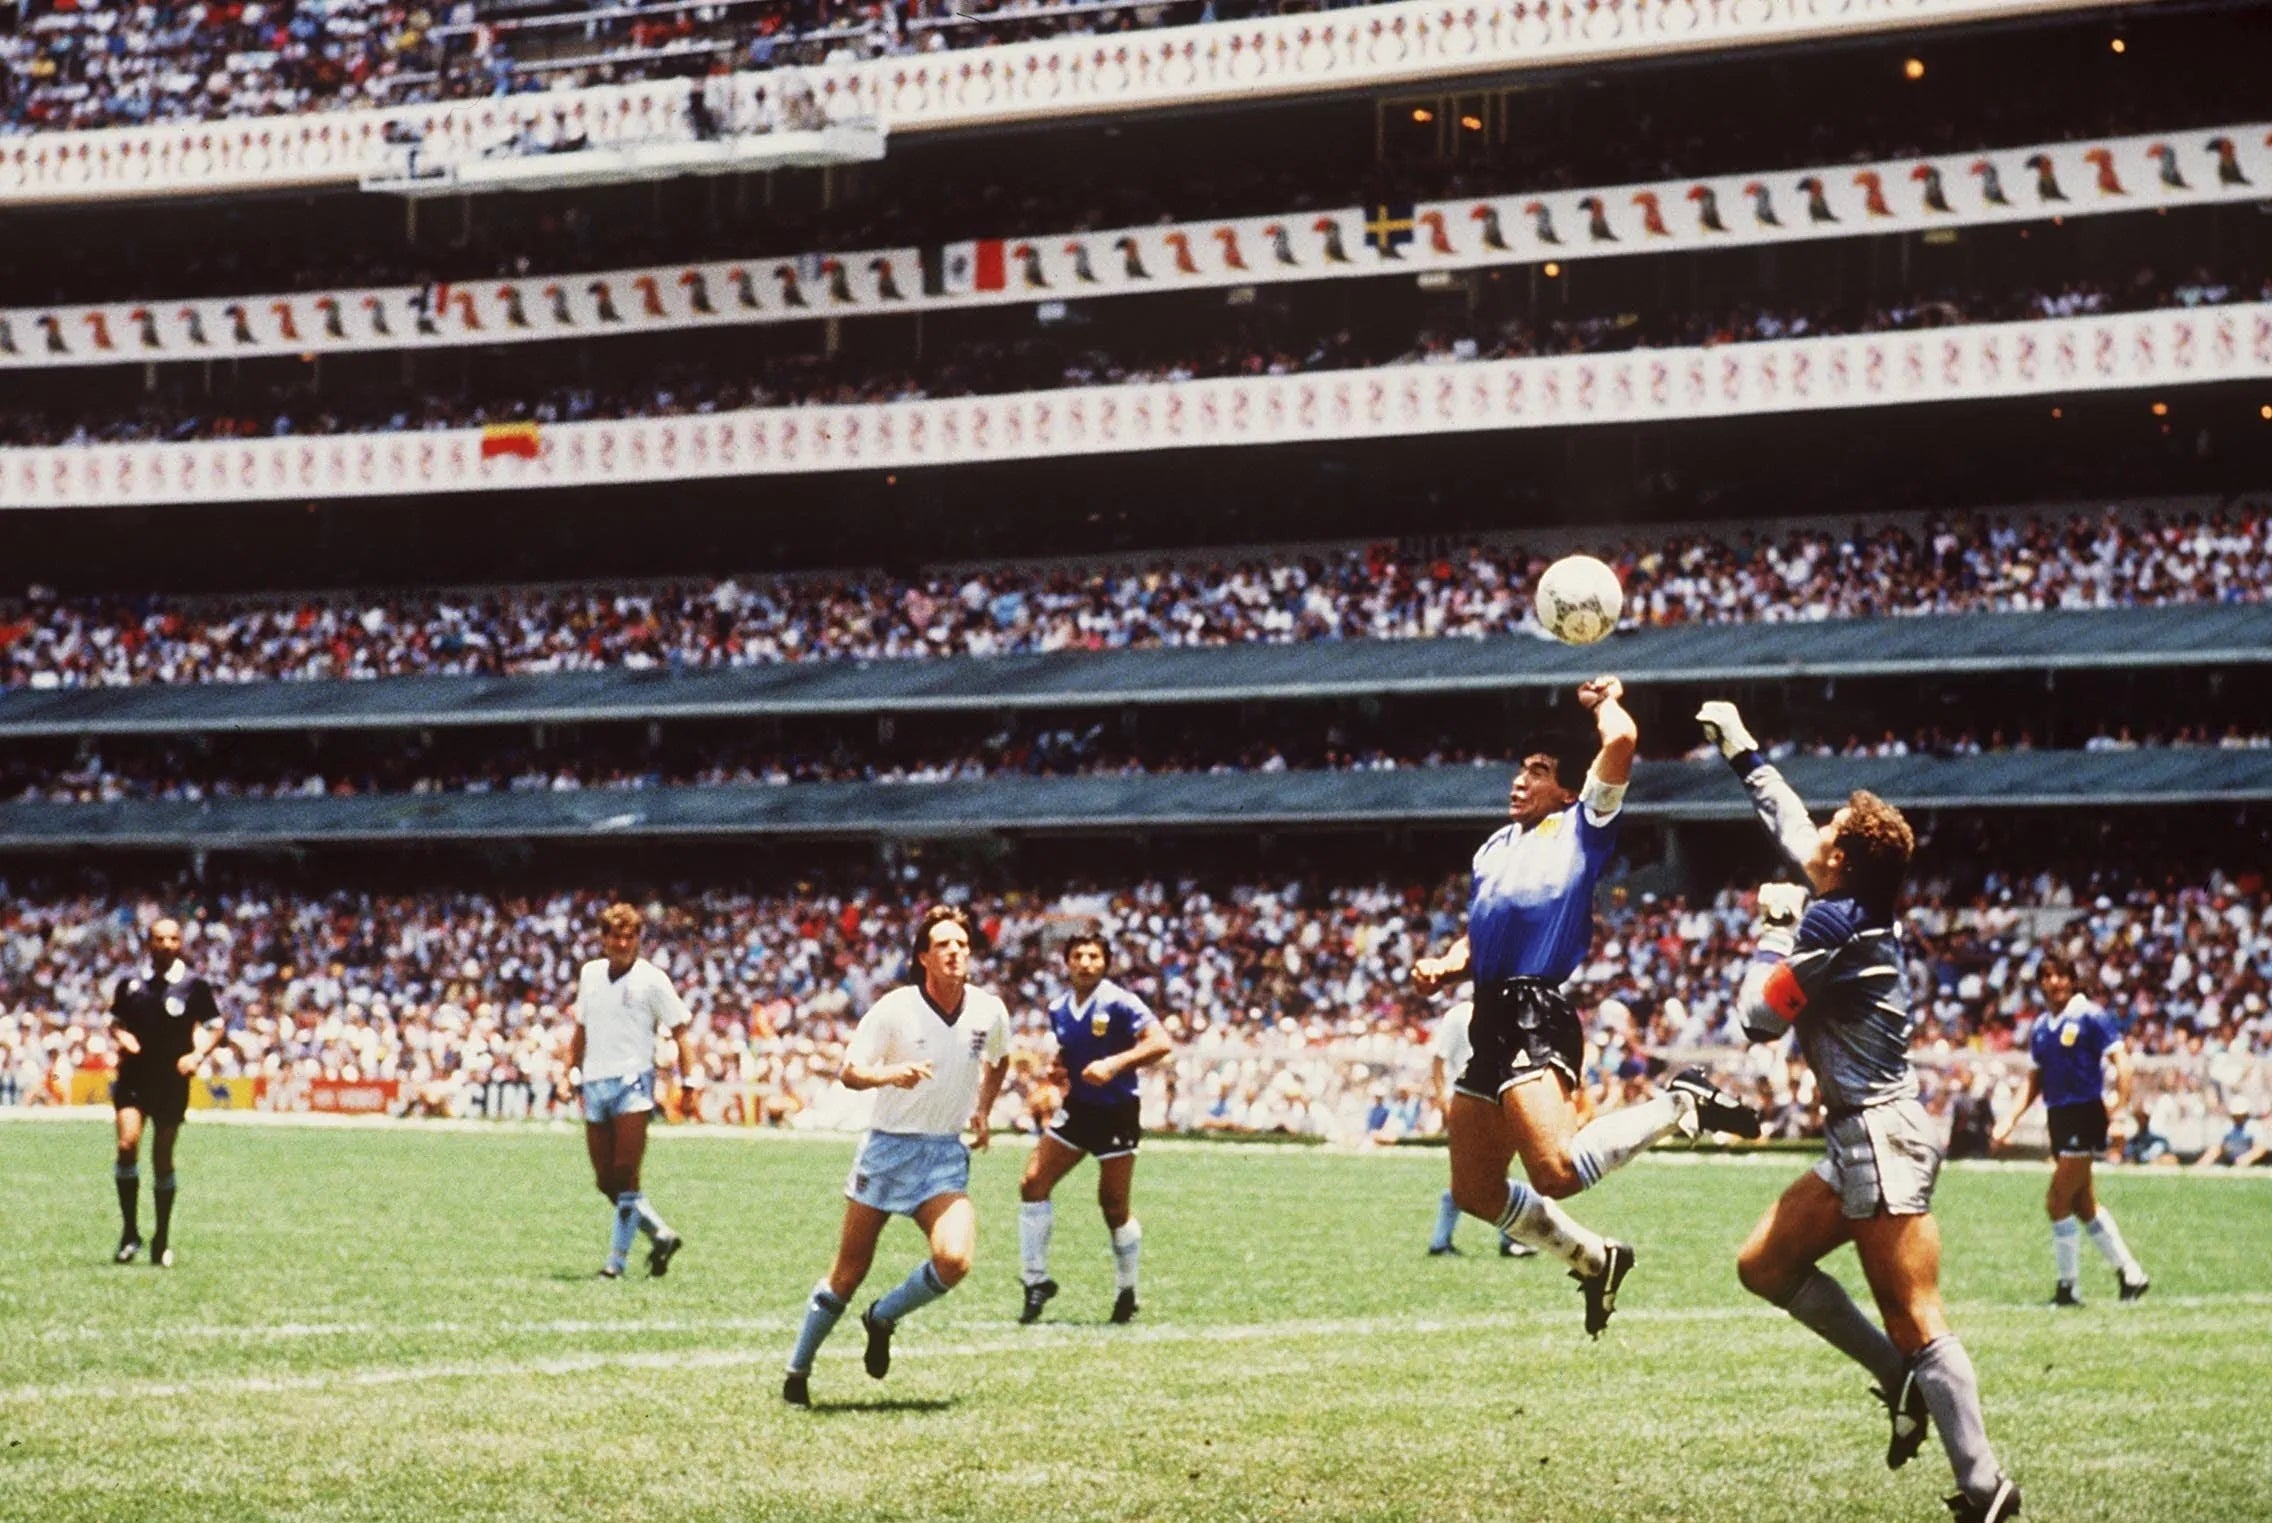 TOP 10 World Cup Memories of All Time , Number 1 - Diego Maradona’s ‘Hand Of God’